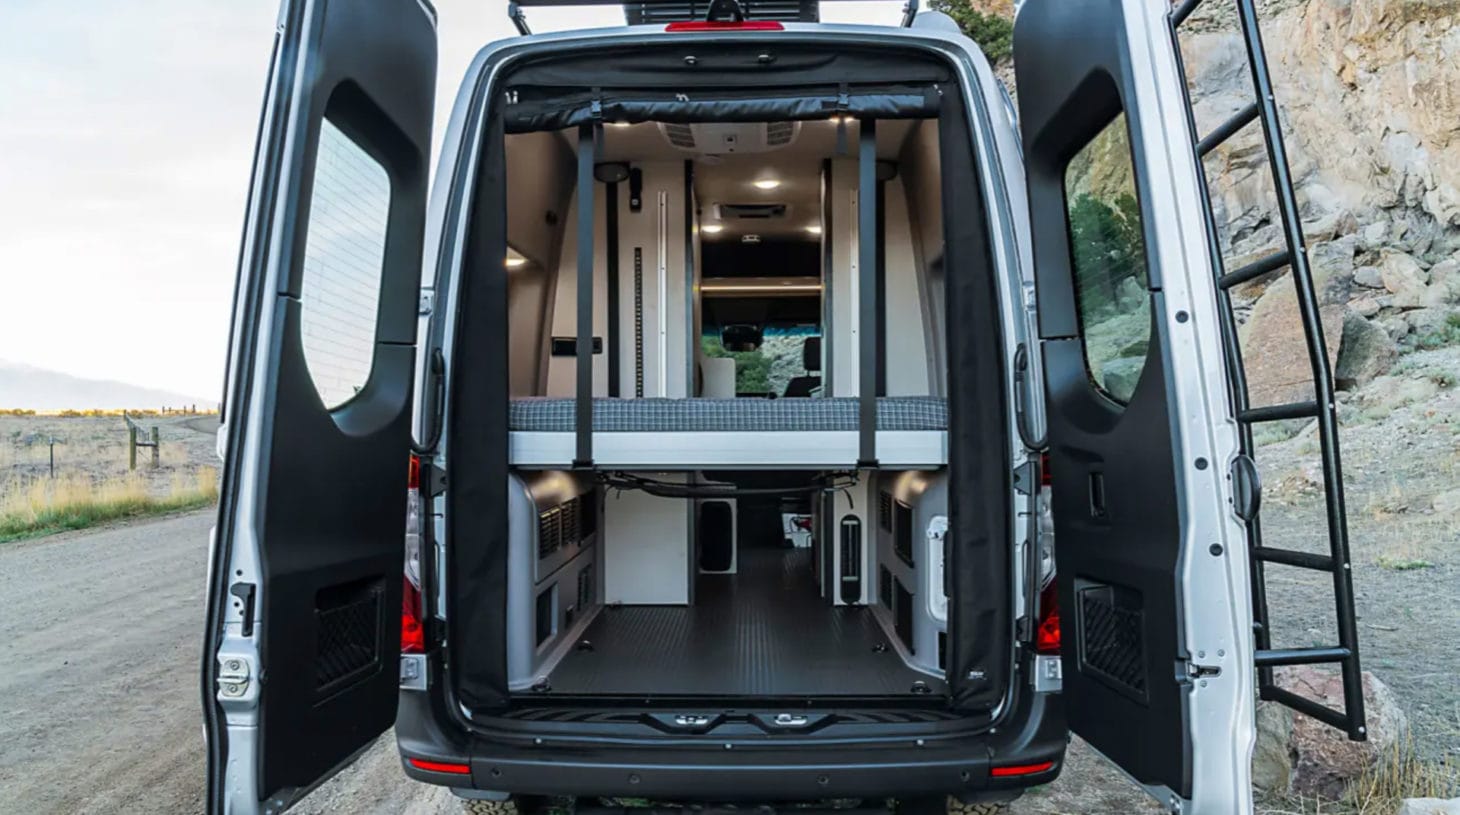 Back view of converted van with bed on lifts for storage and living space